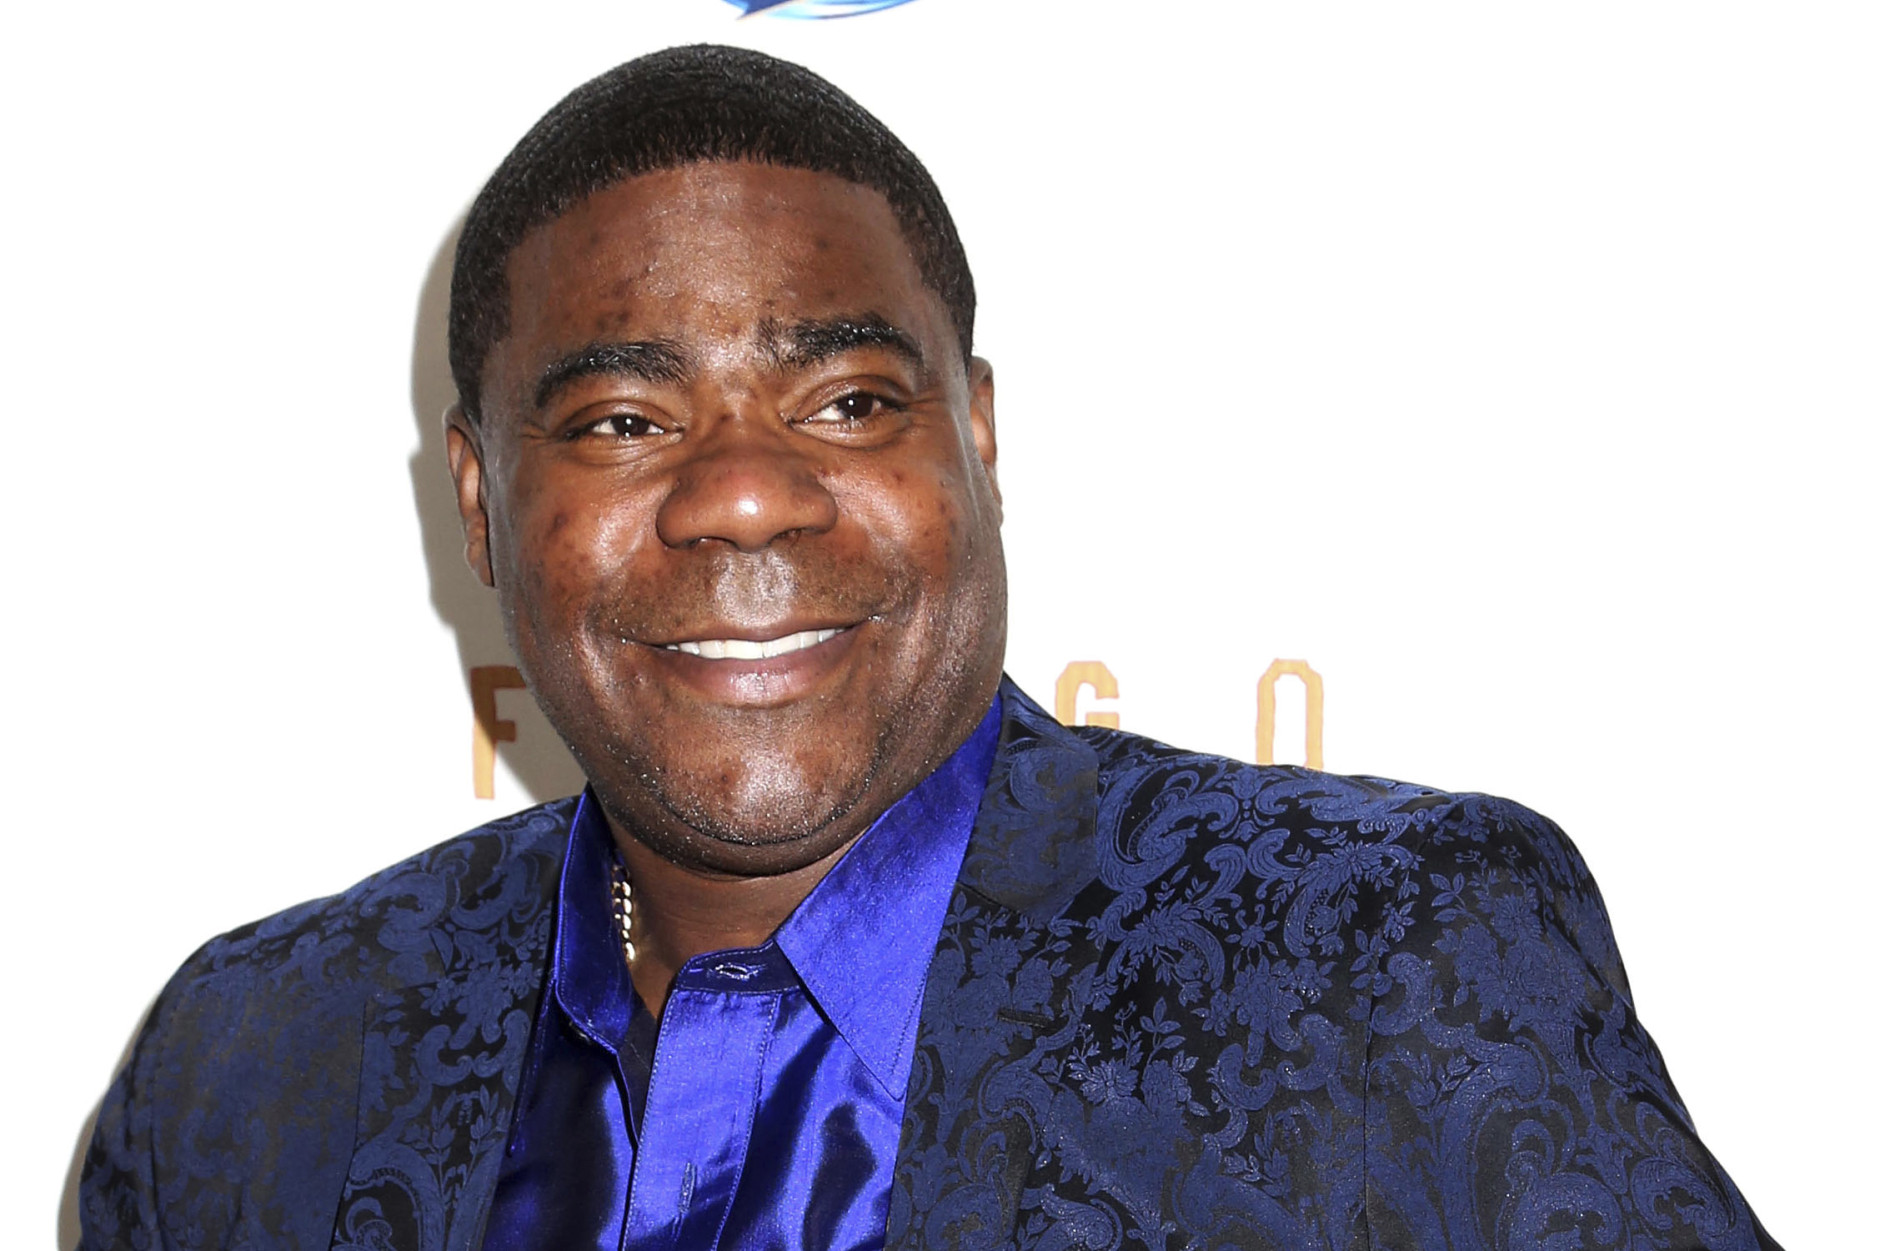 FILE - In this April 9, 2014, file photo, actor Tracy Morgan attends the FX Networks Upfront premiere screening of "Fargo" at the SVA Theater in New York. The National Transportation Safety Board is meeting Aug. 11, 2015, to determine the cause of an accident a year ago that severely injured comedian Tracy Morgan and killed another comedian when a truck smashed into their limousine during a traffic backup on the New Jersey Turnpike.  (Photo by Greg Allen/Invision/AP, File)